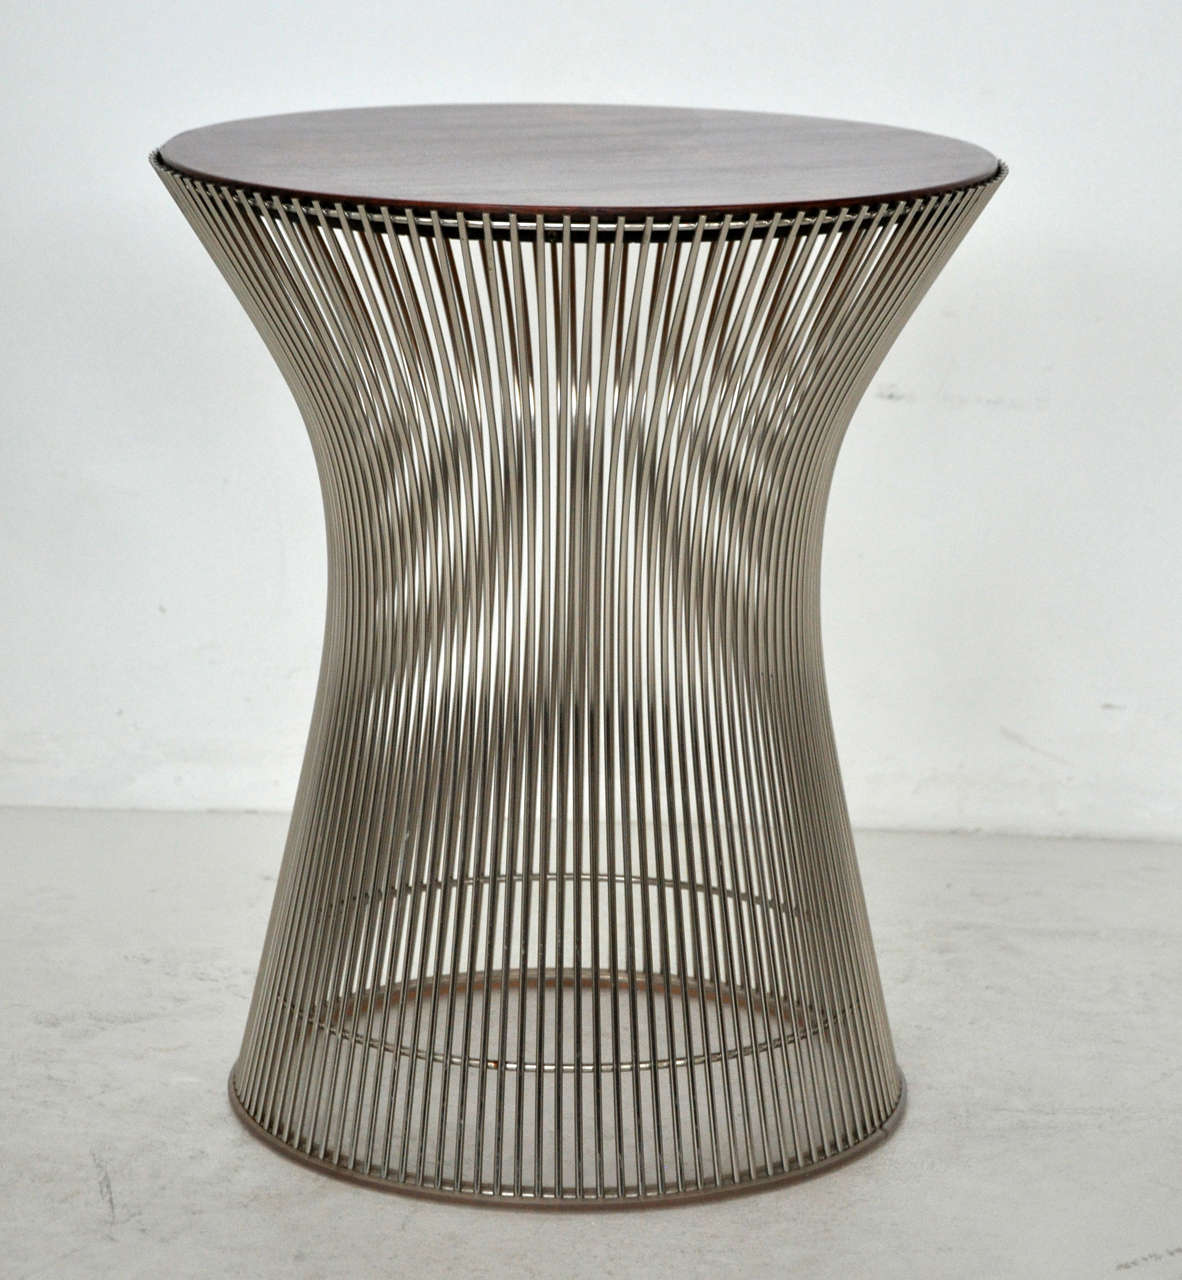 Nickel base side table with rosewood top. Beautiful wood grain. Designed by Warren Platner for Knoll.